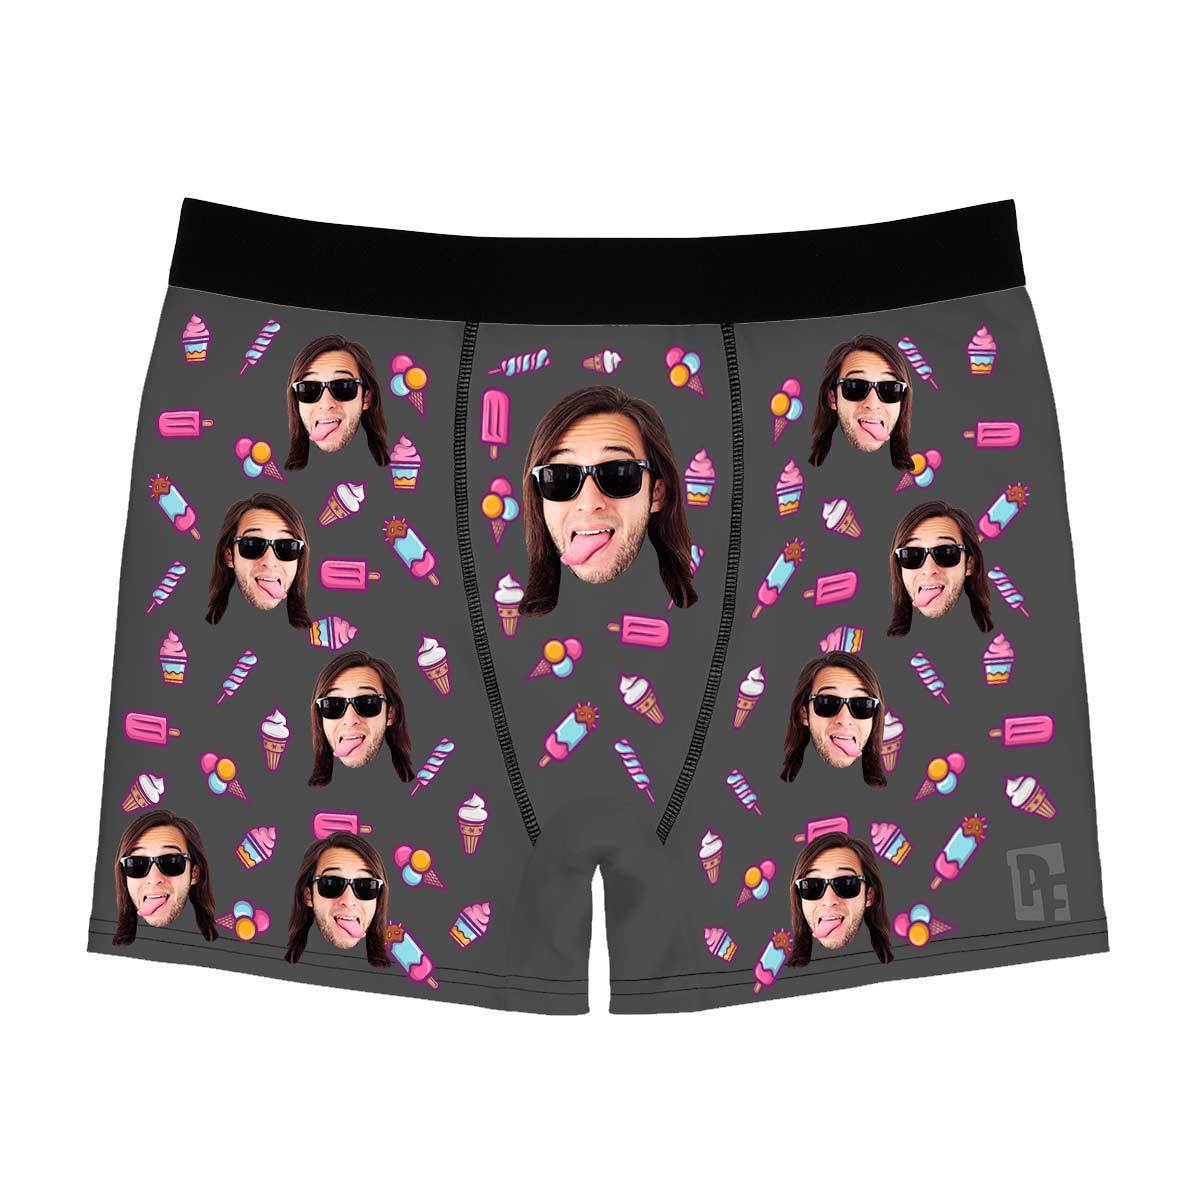 Dark Candies men's boxer briefs personalized with photo printed on them